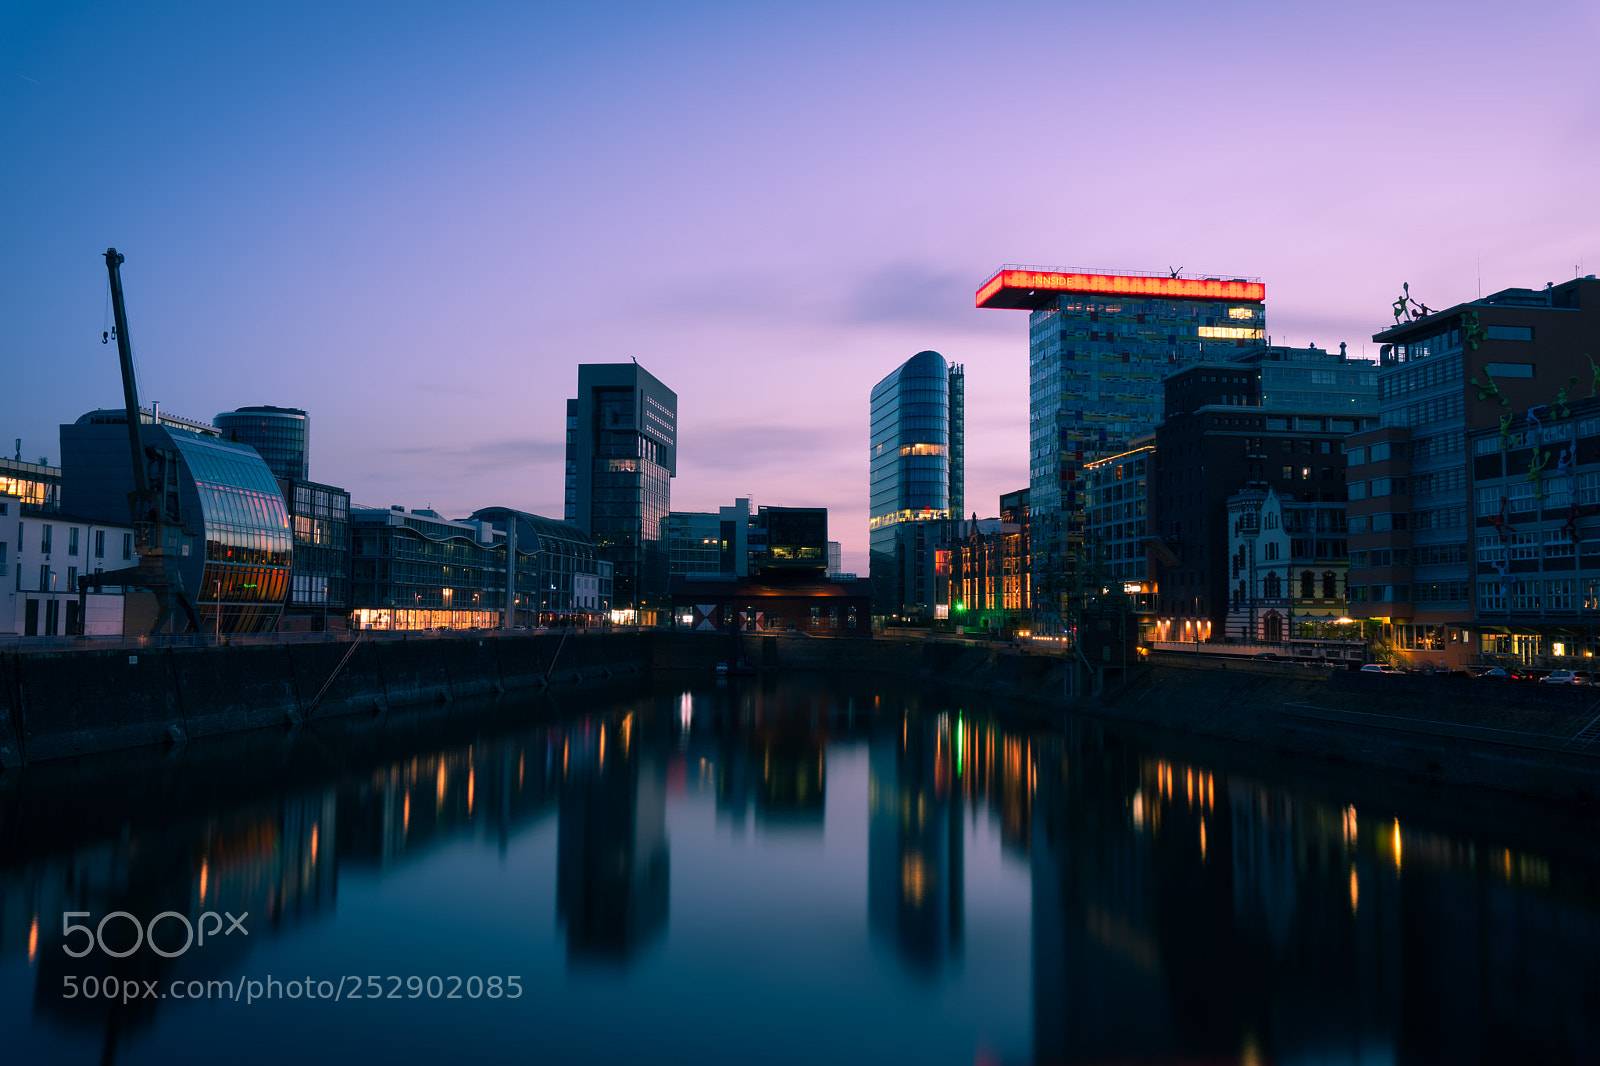 Sony a6300 sample photo. D sseldorf medienhafen photography